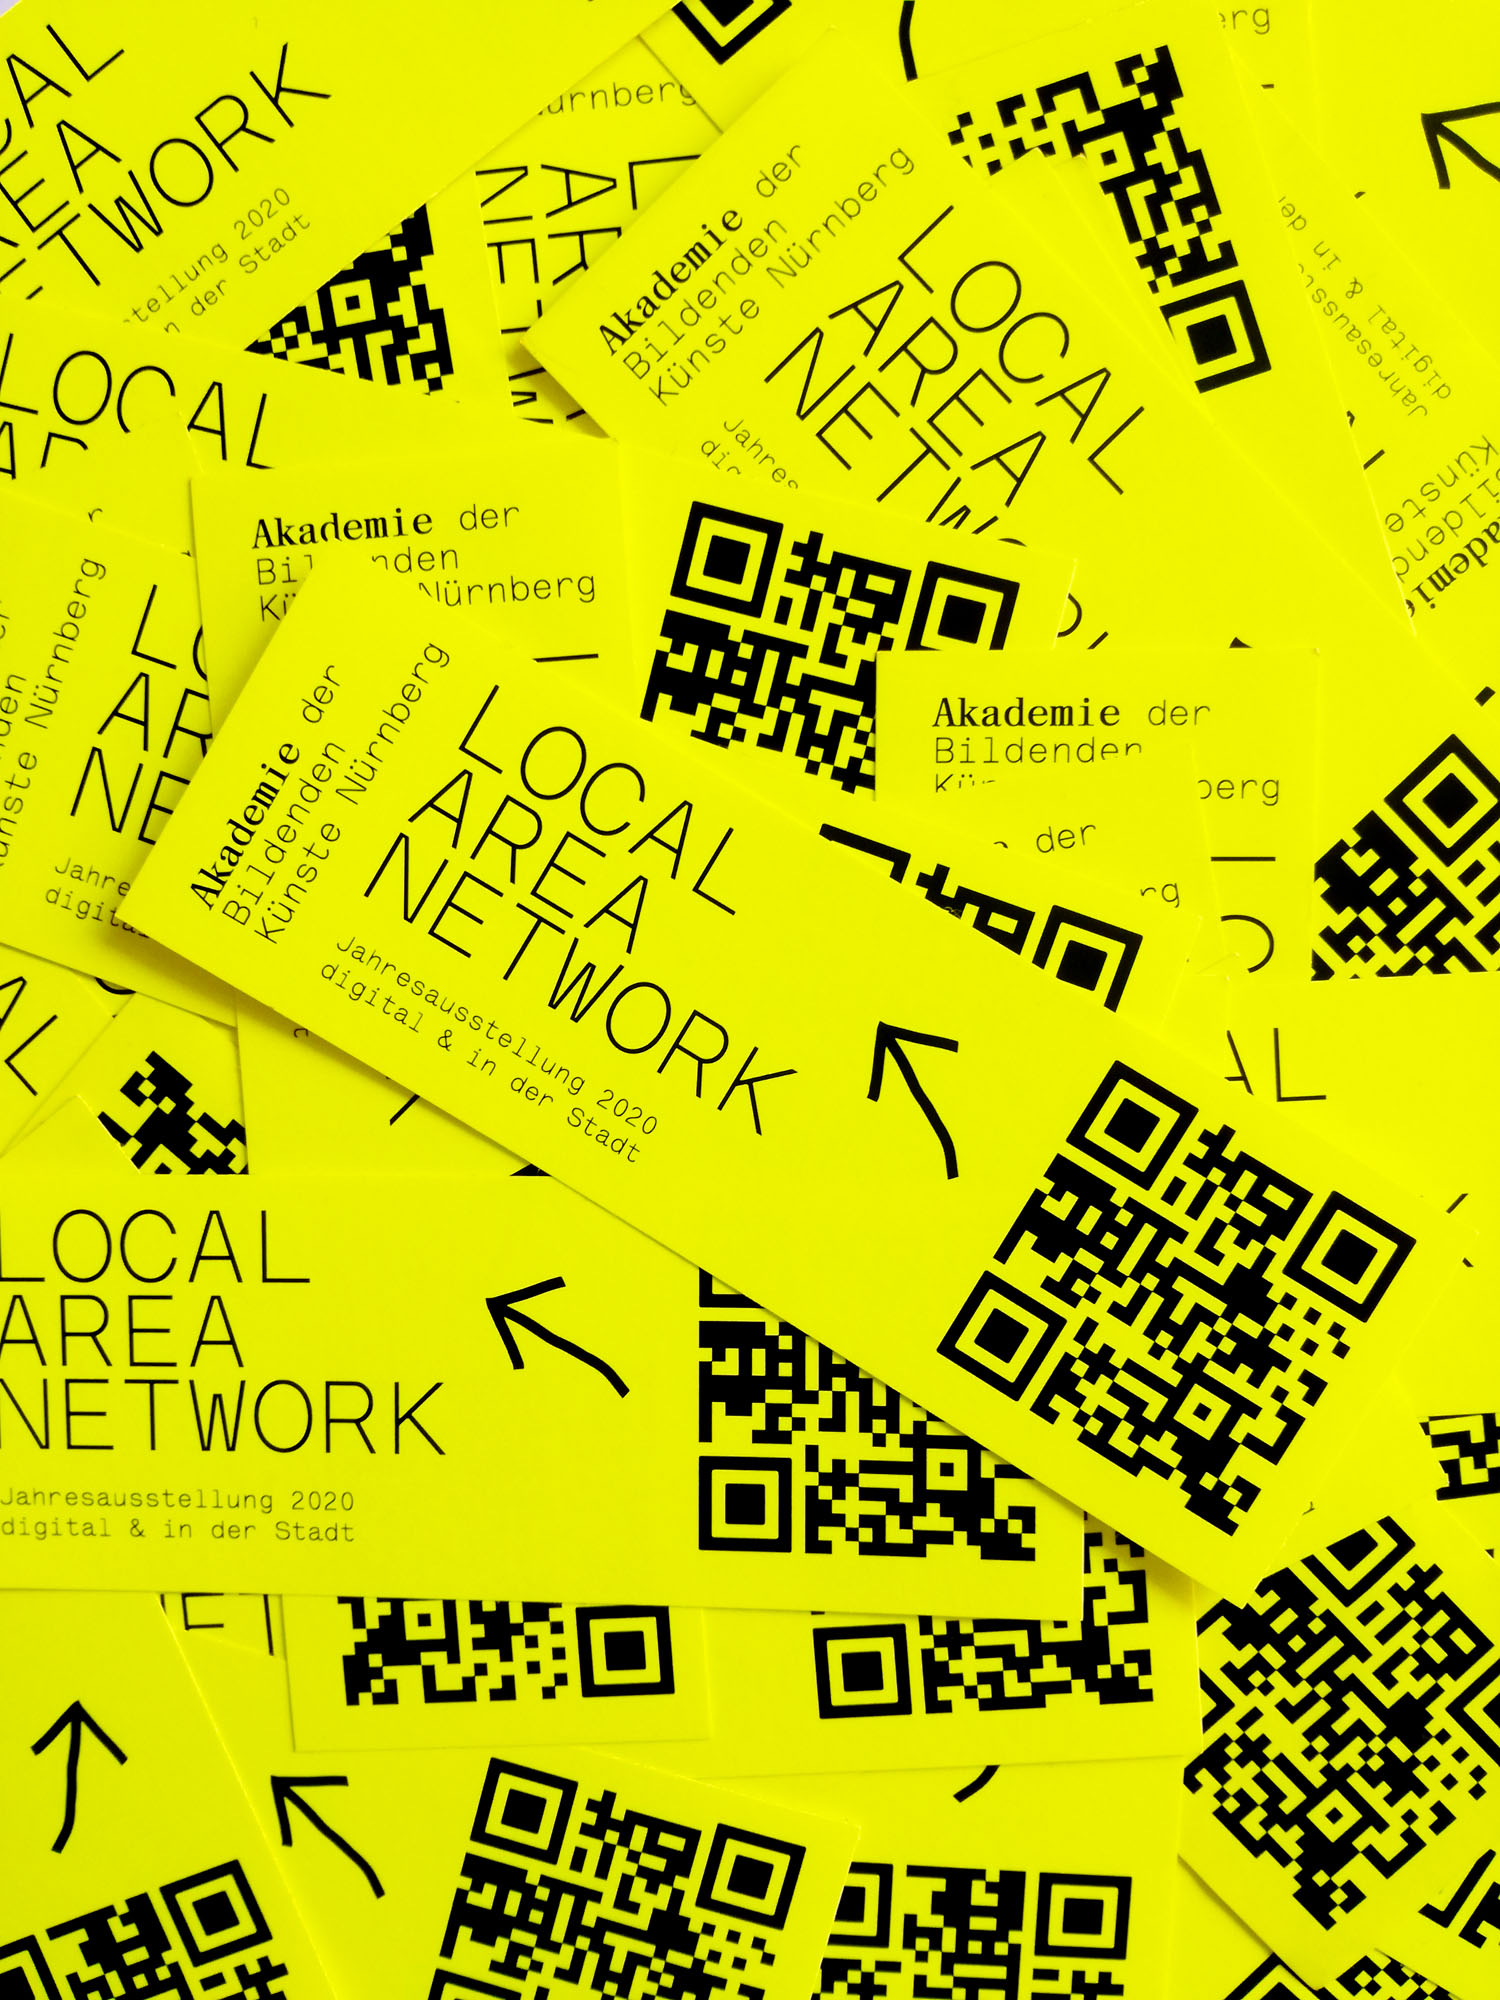 Yellow stickers for Local Area Network 2020